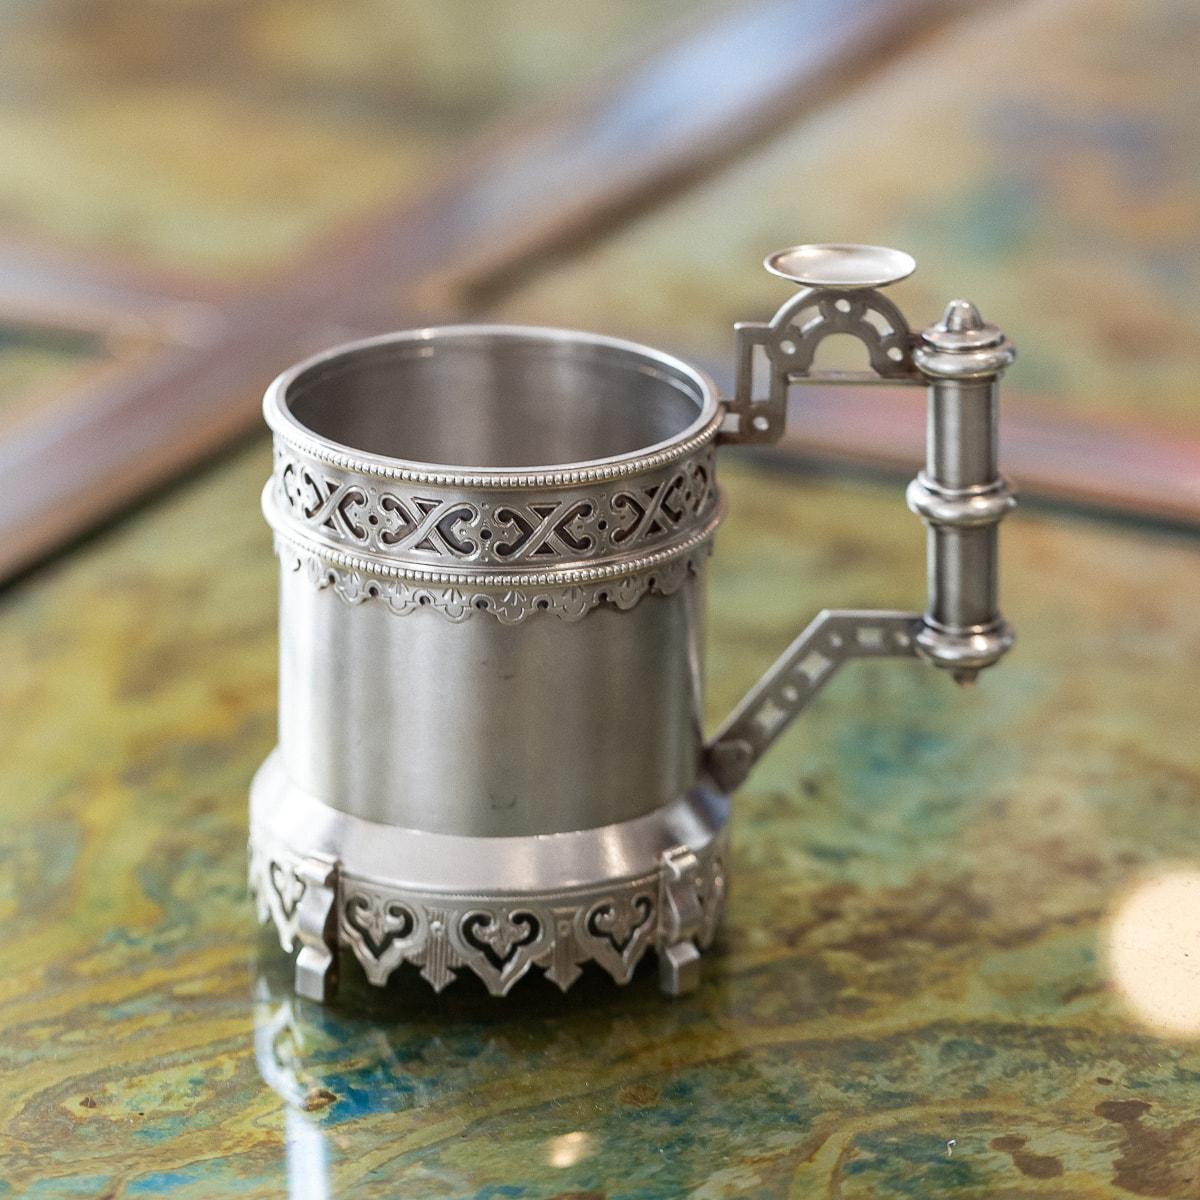 Antique 19th Century Imperial Russian solid silver tea glass holder of a cylindrical form, beautifully applied with pierced and engraved boarders, on shaped supporting feet and applied handle also in cylindrical form with added thumb piece adorning